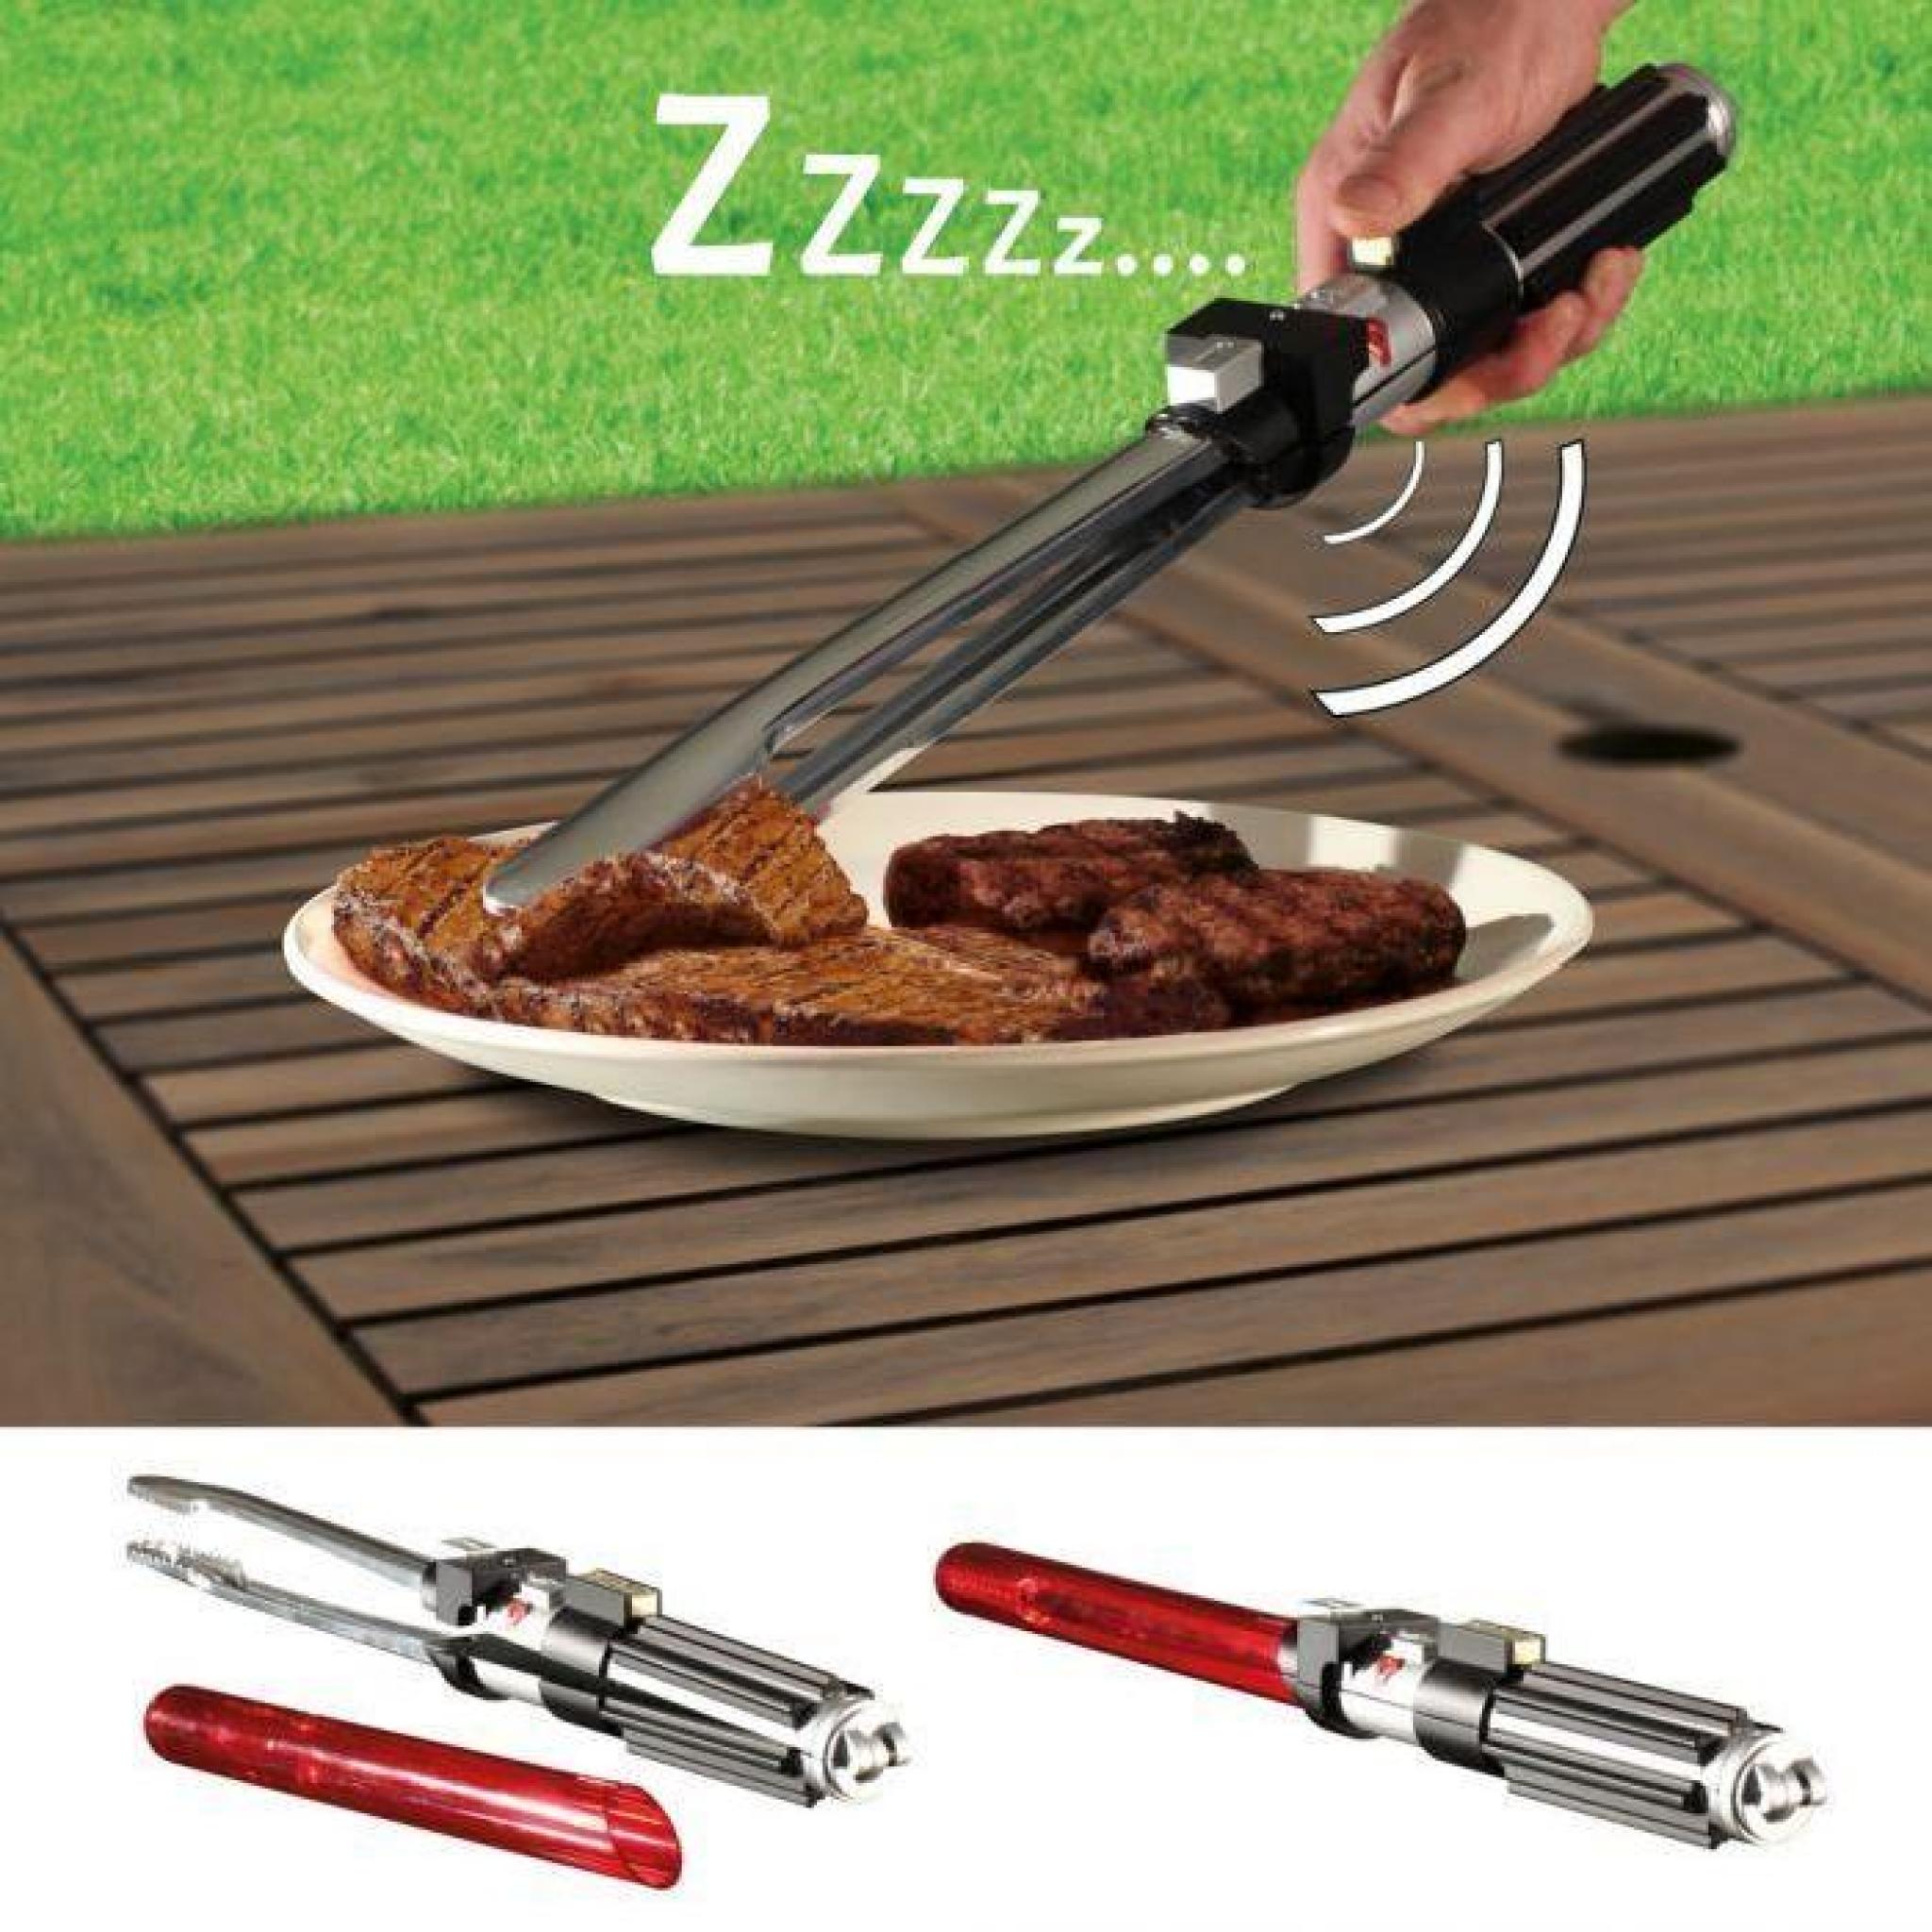 Maxi Pince pour Barbecue Sabre Laser Star Wars pas cher